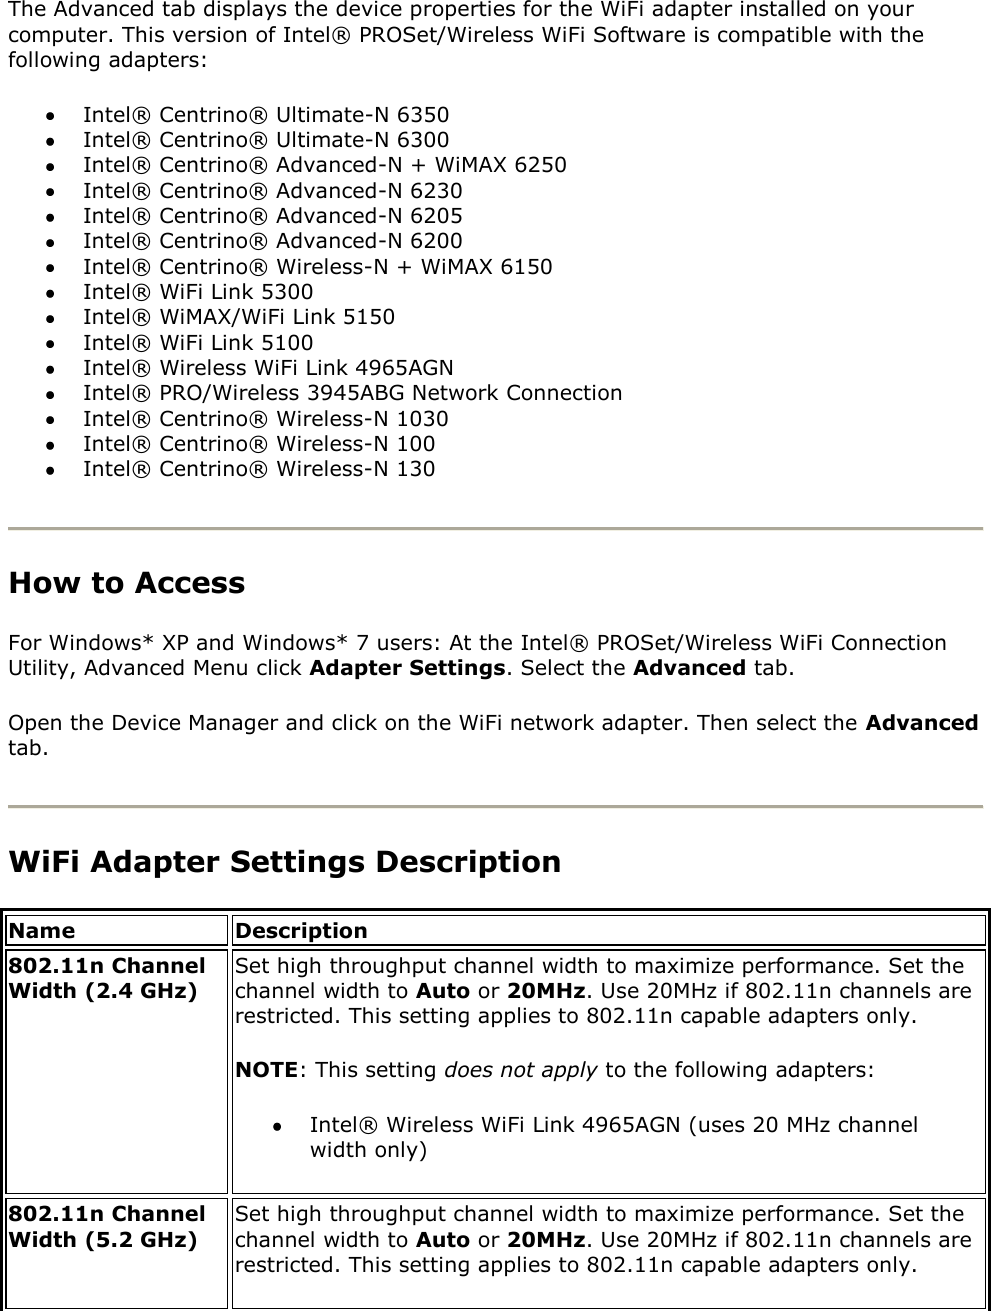 The Advanced tab displays the device properties for the WiFi adapter installed on your computer. This version of Intel® PROSet/Wireless WiFi Software is compatible with the following adapters:   Intel® Centrino® Ultimate-N 6350  Intel® Centrino® Ultimate-N 6300  Intel® Centrino® Advanced-N + WiMAX 6250  Intel® Centrino® Advanced-N 6230  Intel® Centrino® Advanced-N 6205  Intel® Centrino® Advanced-N 6200  Intel® Centrino® Wireless-N + WiMAX 6150   Intel® WiFi Link 5300  Intel® WiMAX/WiFi Link 5150  Intel® WiFi Link 5100  Intel® Wireless WiFi Link 4965AGN  Intel® PRO/Wireless 3945ABG Network Connection  Intel® Centrino® Wireless-N 1030  Intel® Centrino® Wireless-N 100  Intel® Centrino® Wireless-N 130   How to Access For Windows* XP and Windows* 7 users: At the Intel® PROSet/Wireless WiFi Connection Utility, Advanced Menu click Adapter Settings. Select the Advanced tab. Open the Device Manager and click on the WiFi network adapter. Then select the Advanced tab.  WiFi Adapter Settings Description Name Description 802.11n Channel Width (2.4 GHz)  Set high throughput channel width to maximize performance. Set the channel width to Auto or 20MHz. Use 20MHz if 802.11n channels are restricted. This setting applies to 802.11n capable adapters only.  NOTE: This setting does not apply to the following adapters:  Intel® Wireless WiFi Link 4965AGN (uses 20 MHz channel width only) 802.11n Channel Width (5.2 GHz)  Set high throughput channel width to maximize performance. Set the channel width to Auto or 20MHz. Use 20MHz if 802.11n channels are restricted. This setting applies to 802.11n capable adapters only.  